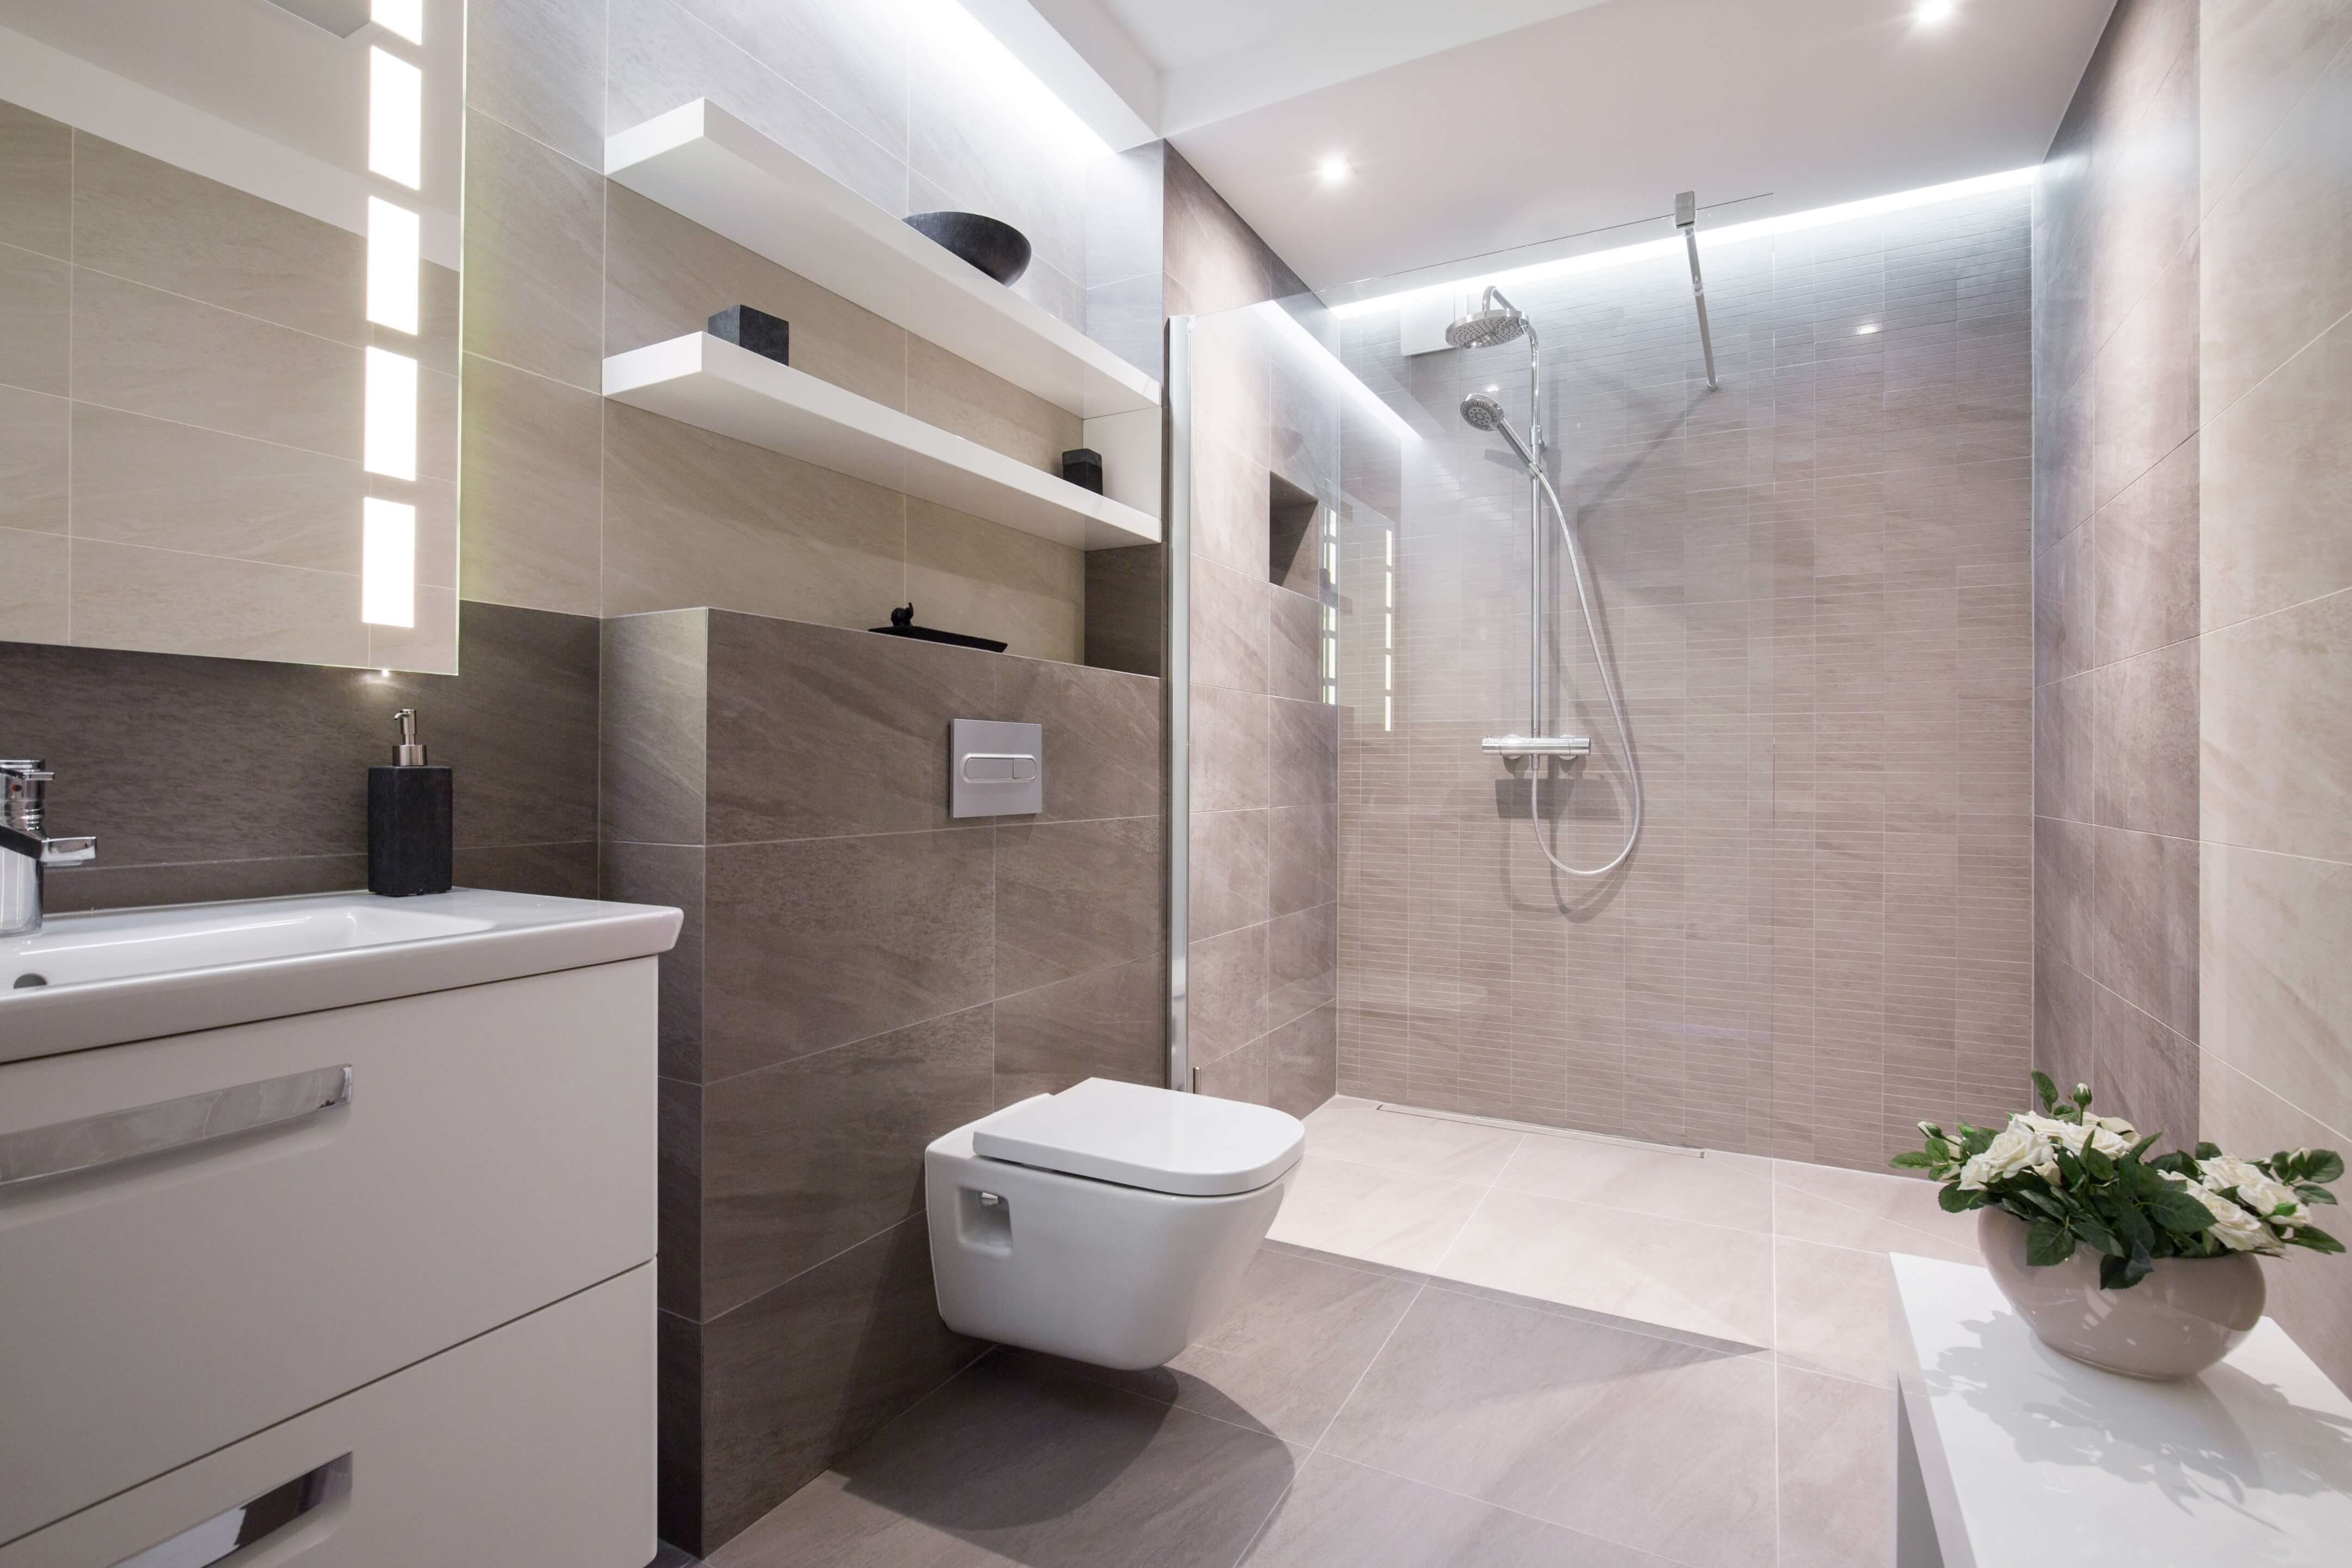 local bathroom fitters new eltham